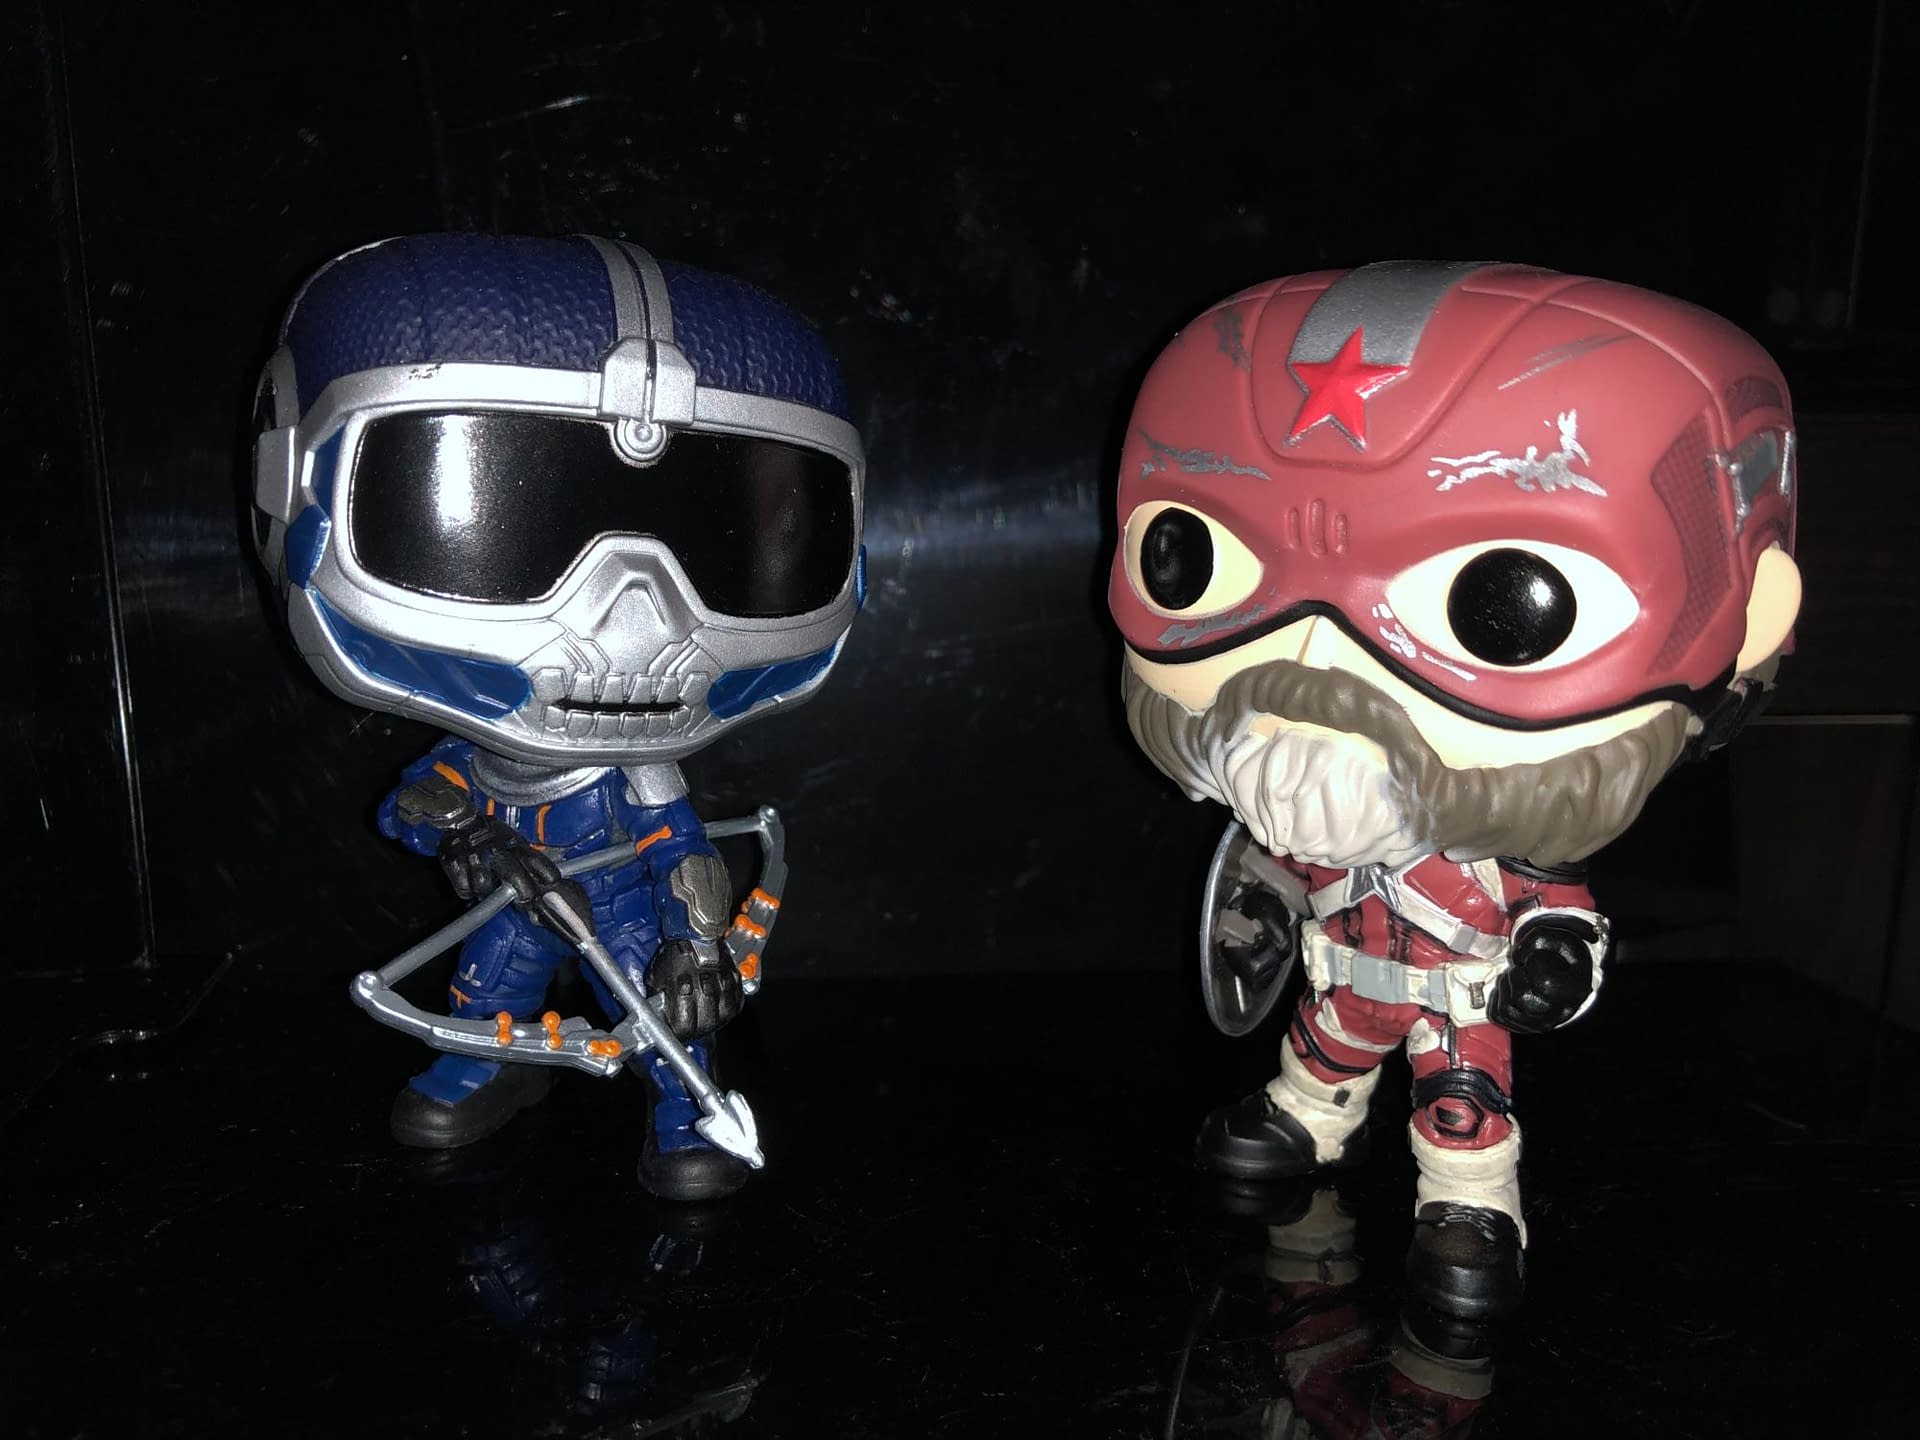 “Black Widow” Red Guardian and Taskmaster Are Here from Funko